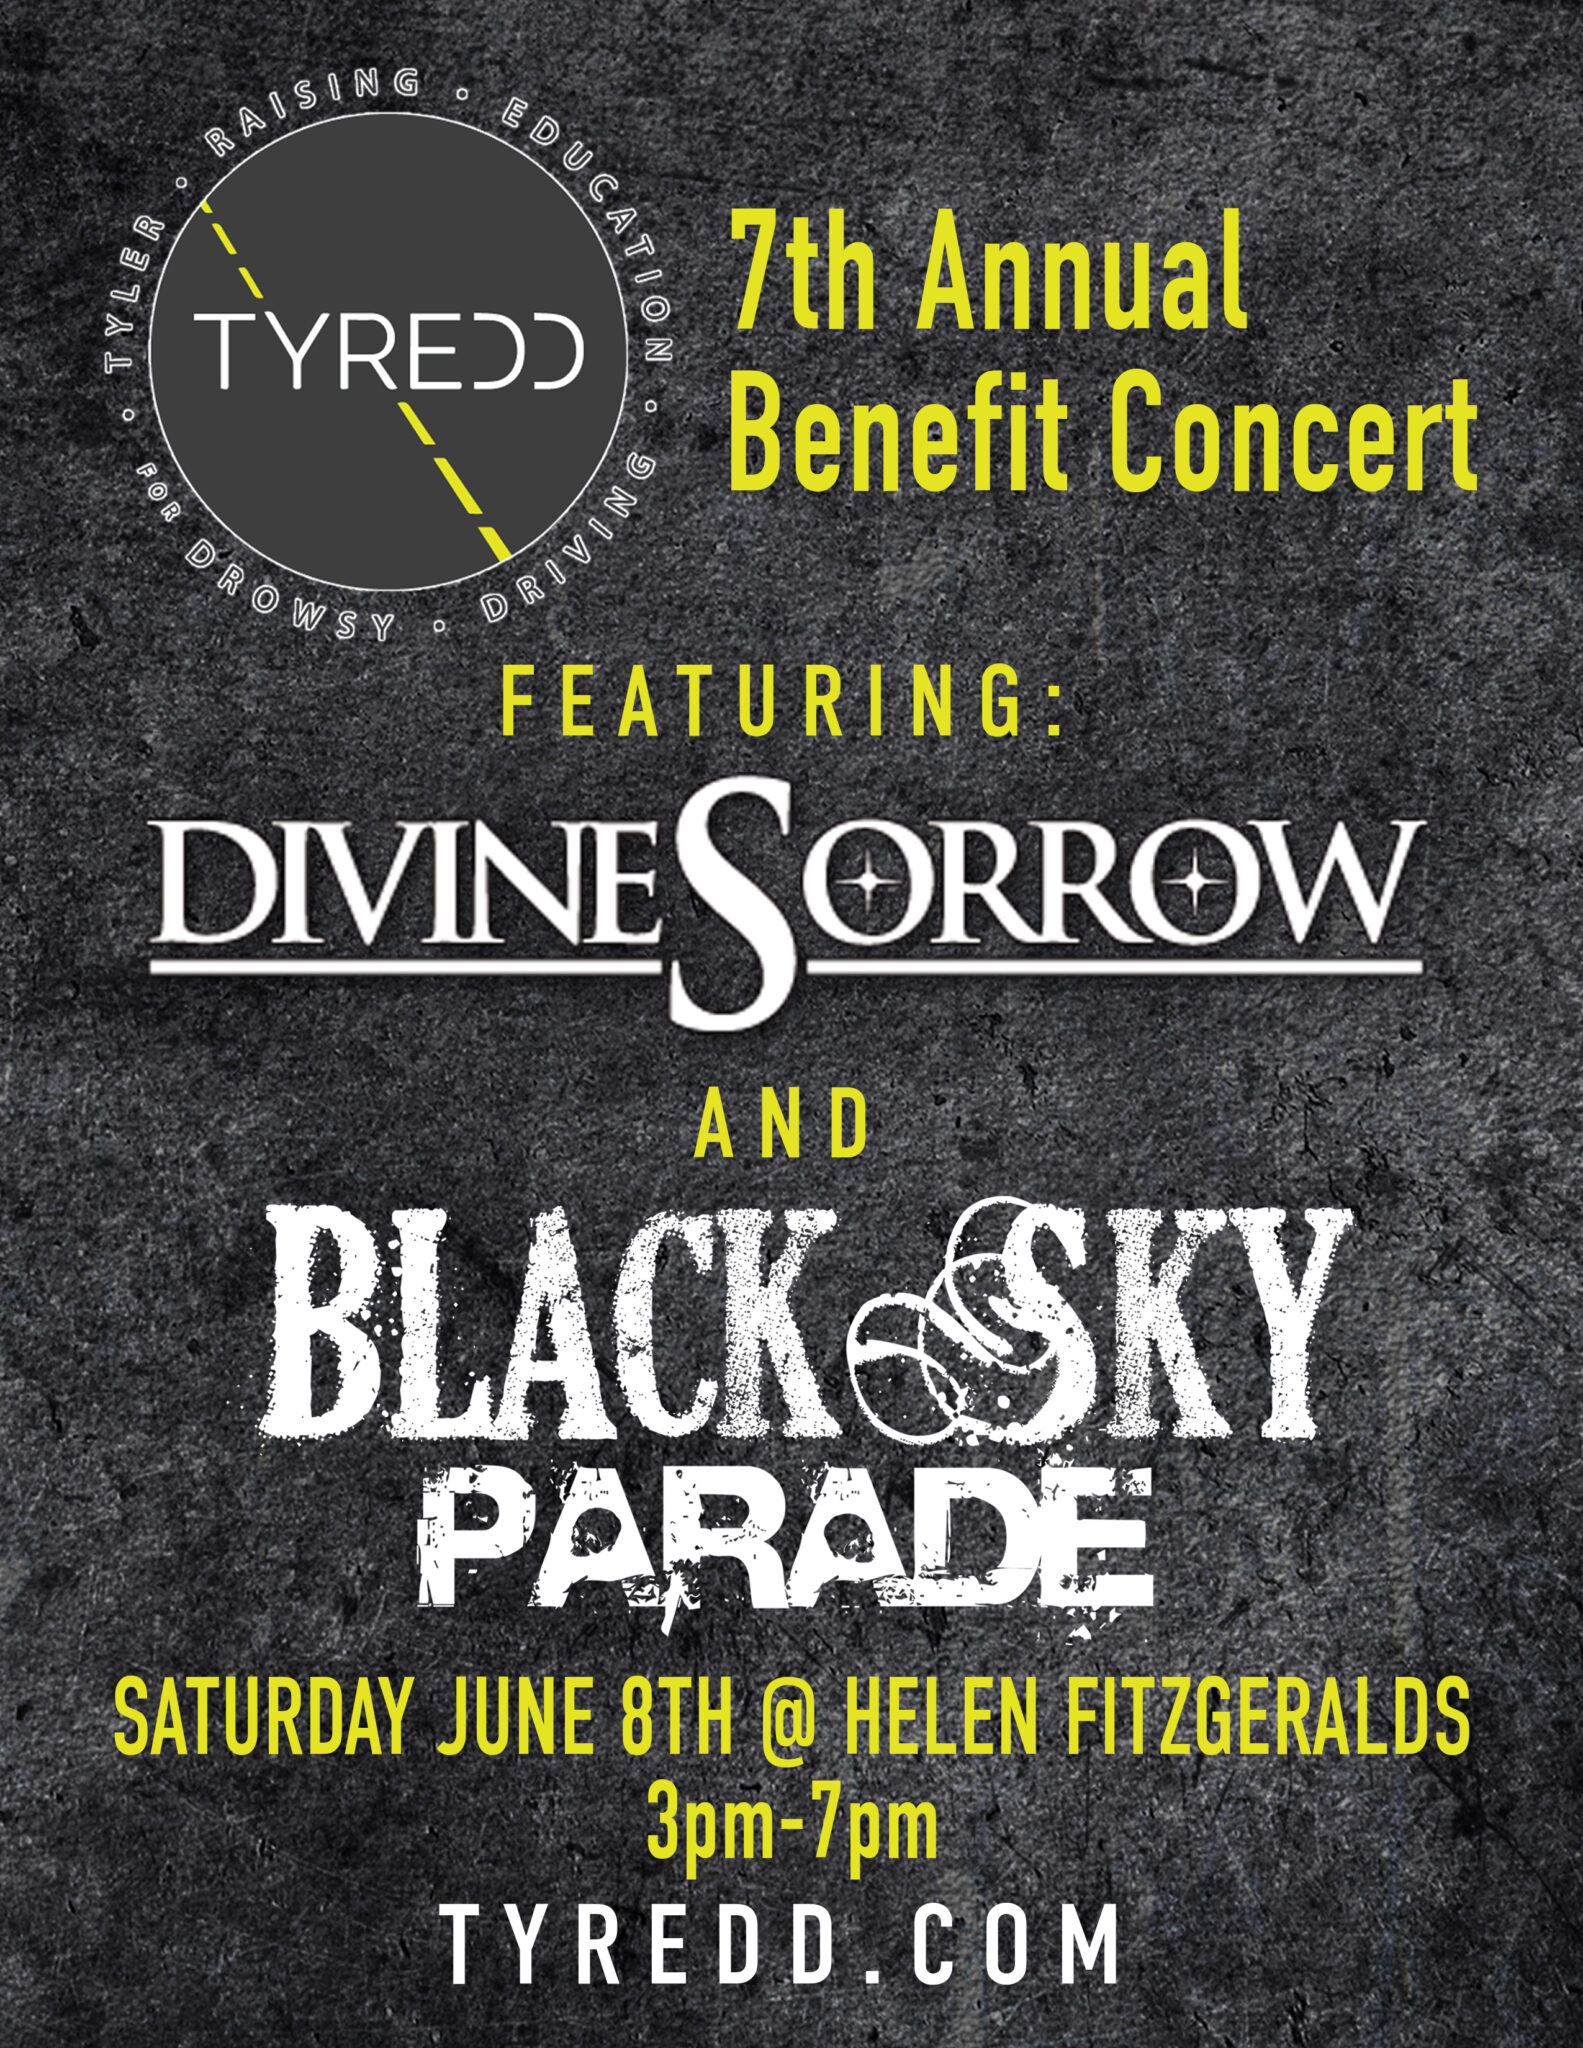 7th Annual Benefit Concert, June 8th @ Helen Fitzgeralds